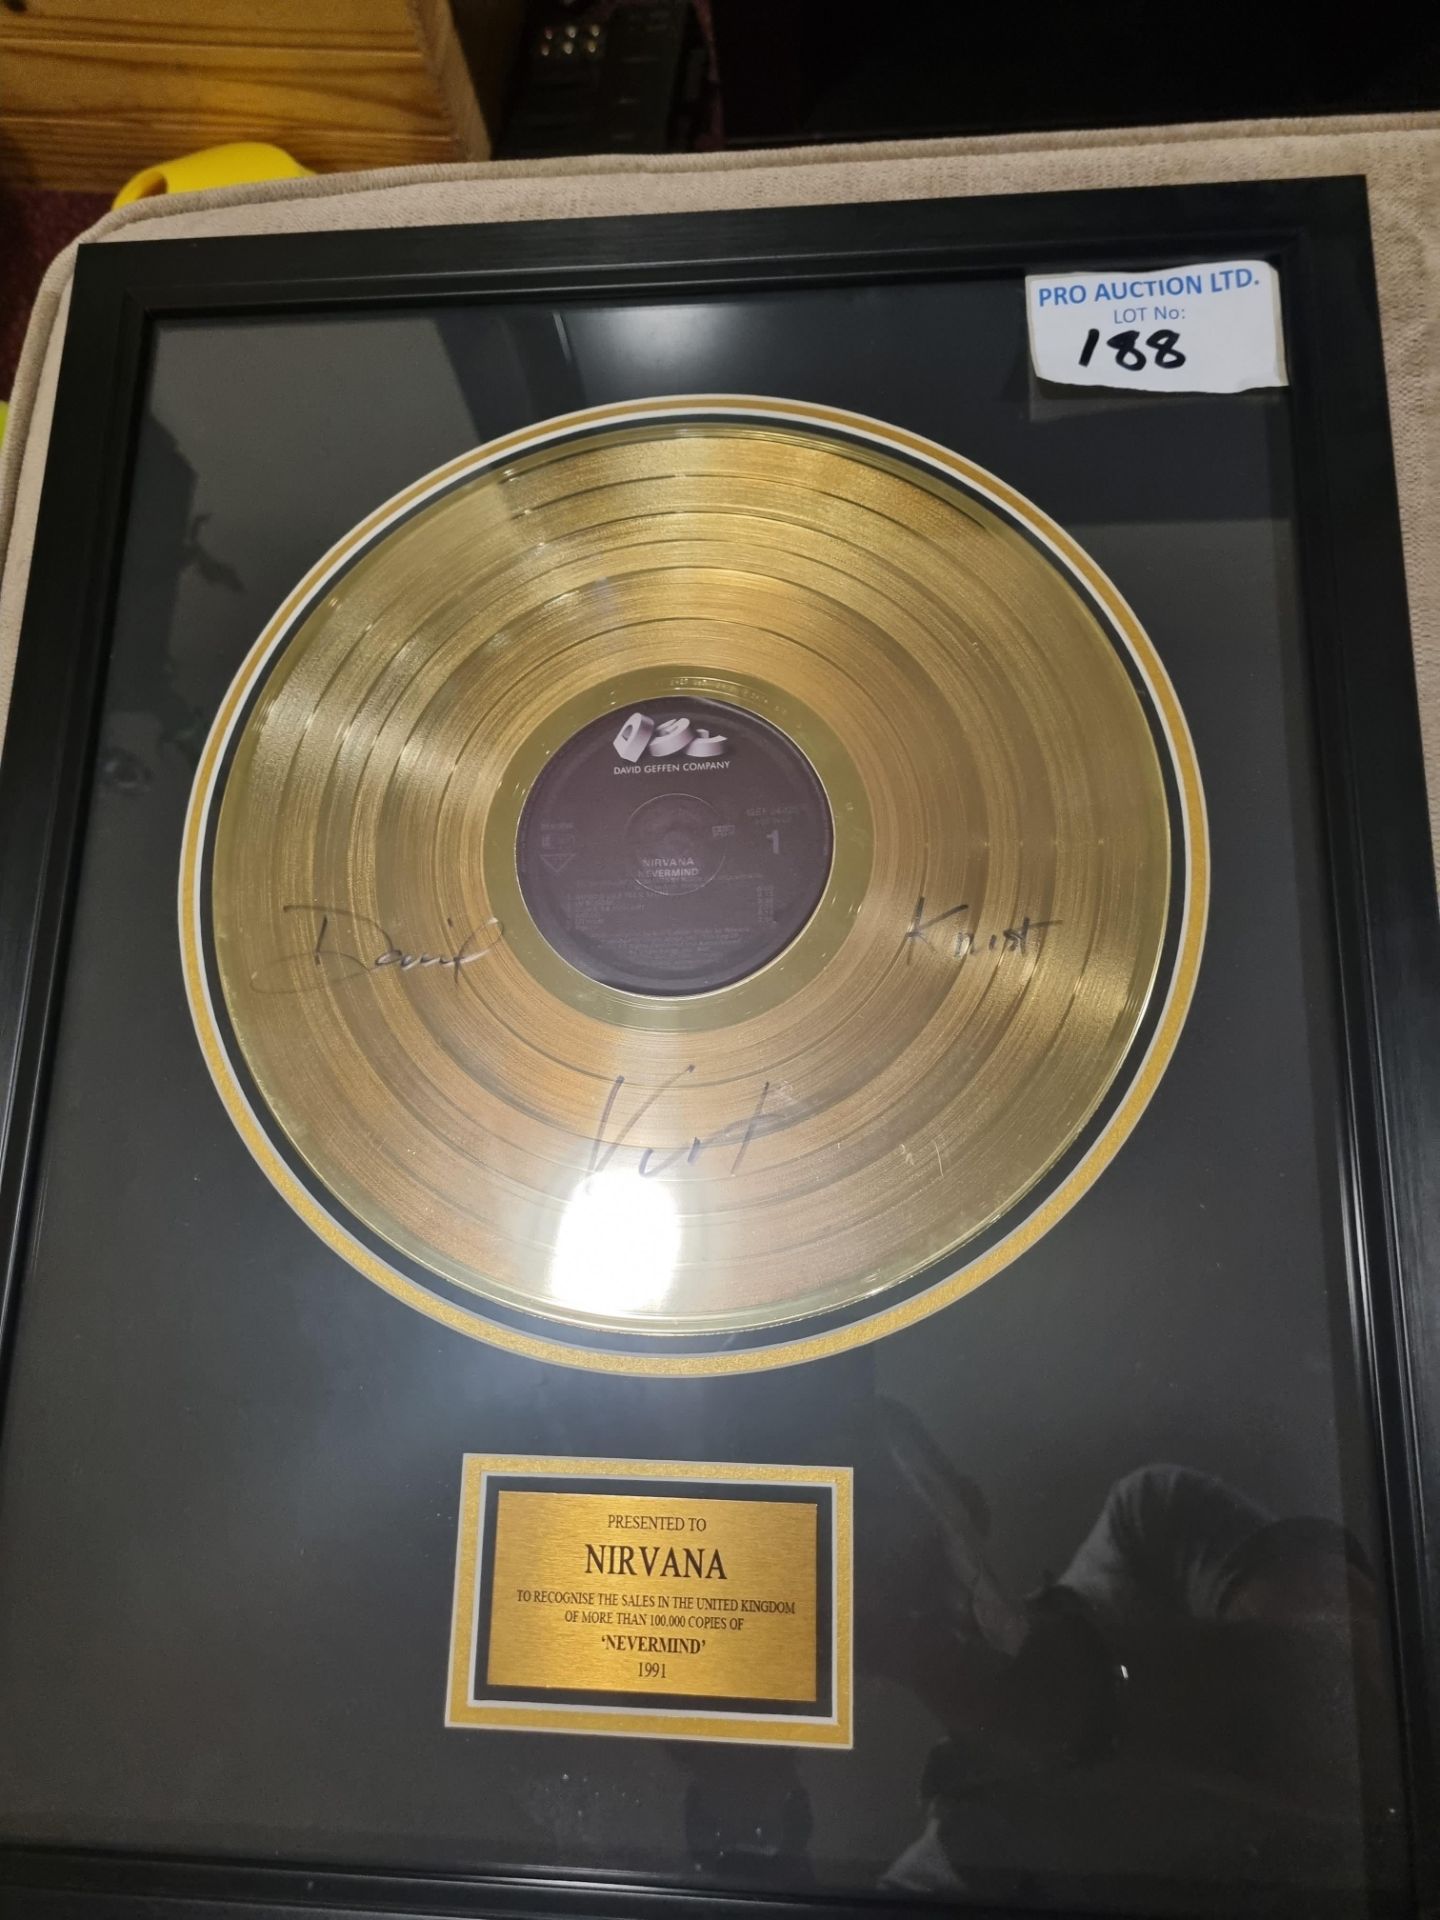 Reproduction The Nirvana 24 Carat Gold Plated LP Record  Framed complete with a note that reads "Was